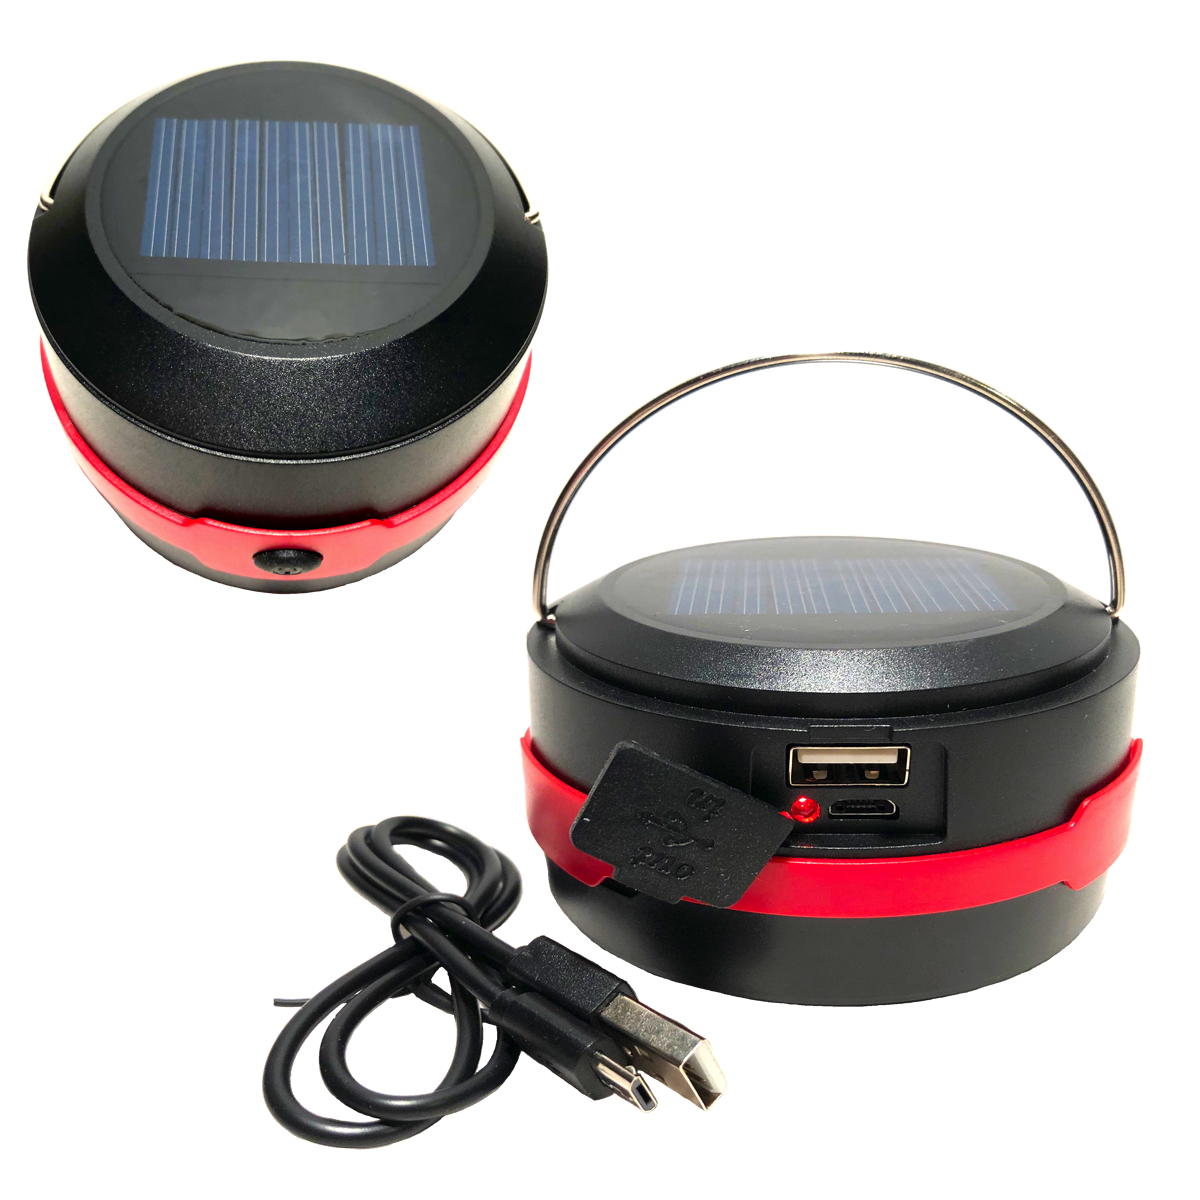 solar powered camping lantern and cell phone charger